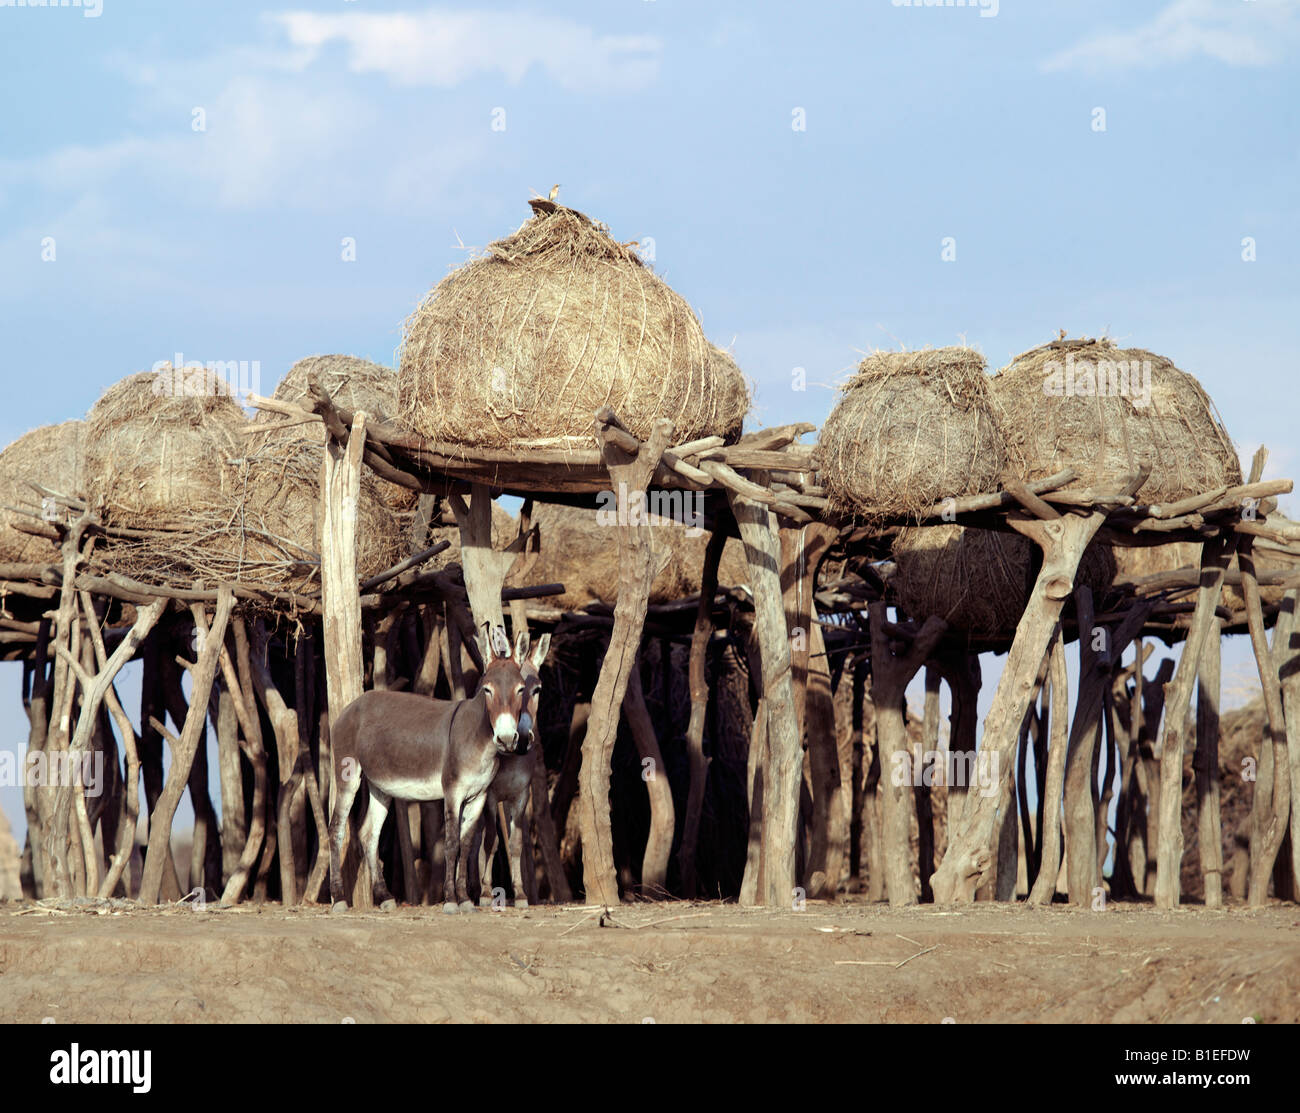 Granaries of a large Dassanech village situated on a bank of the Omo River in Southwest Ethiopia. Stock Photo